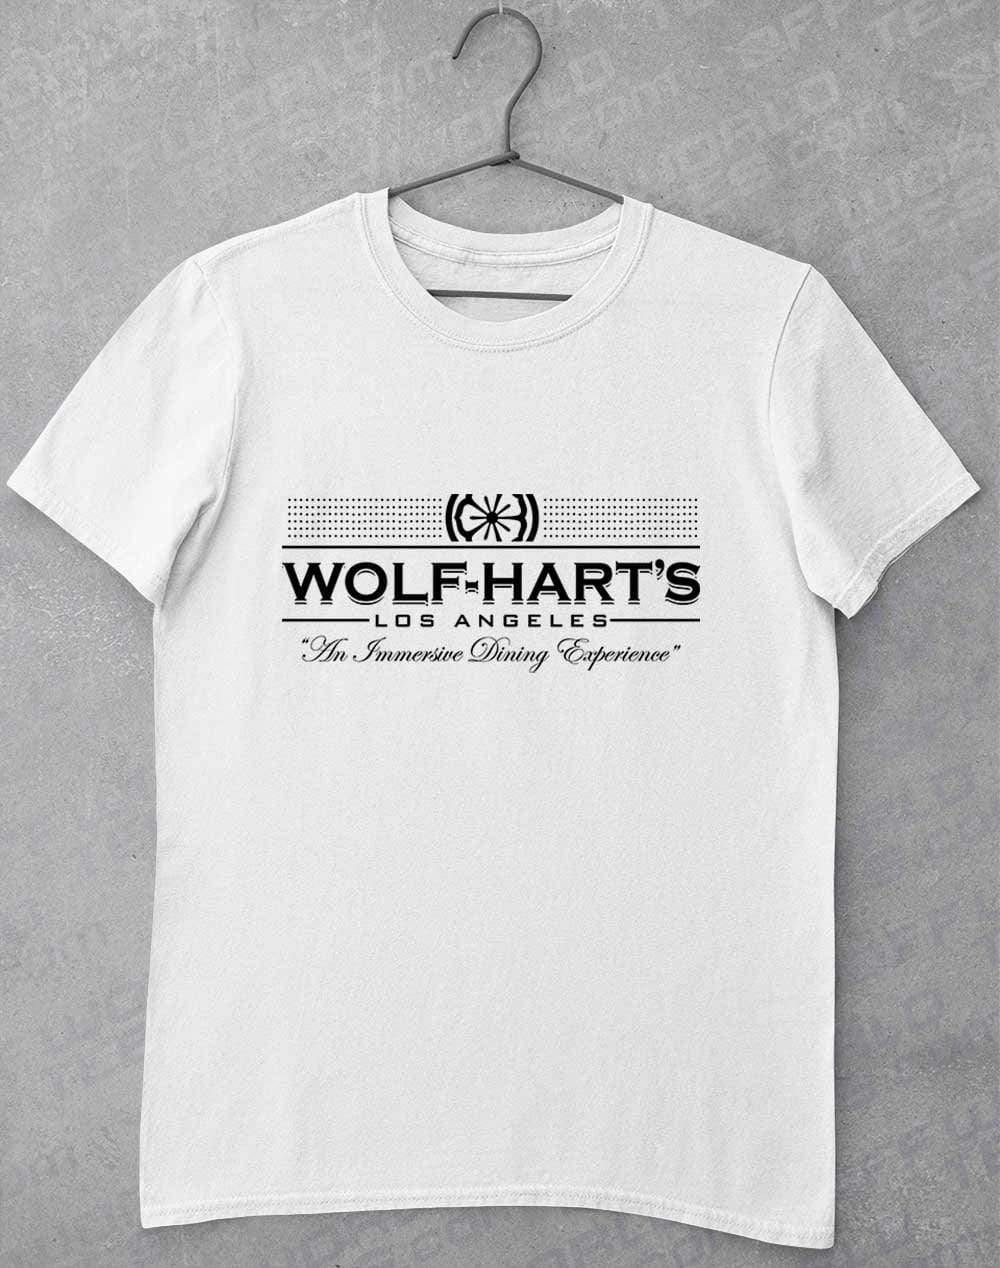 Wolf-Hart's Dining Experience T-Shirt S / White  - Off World Tees